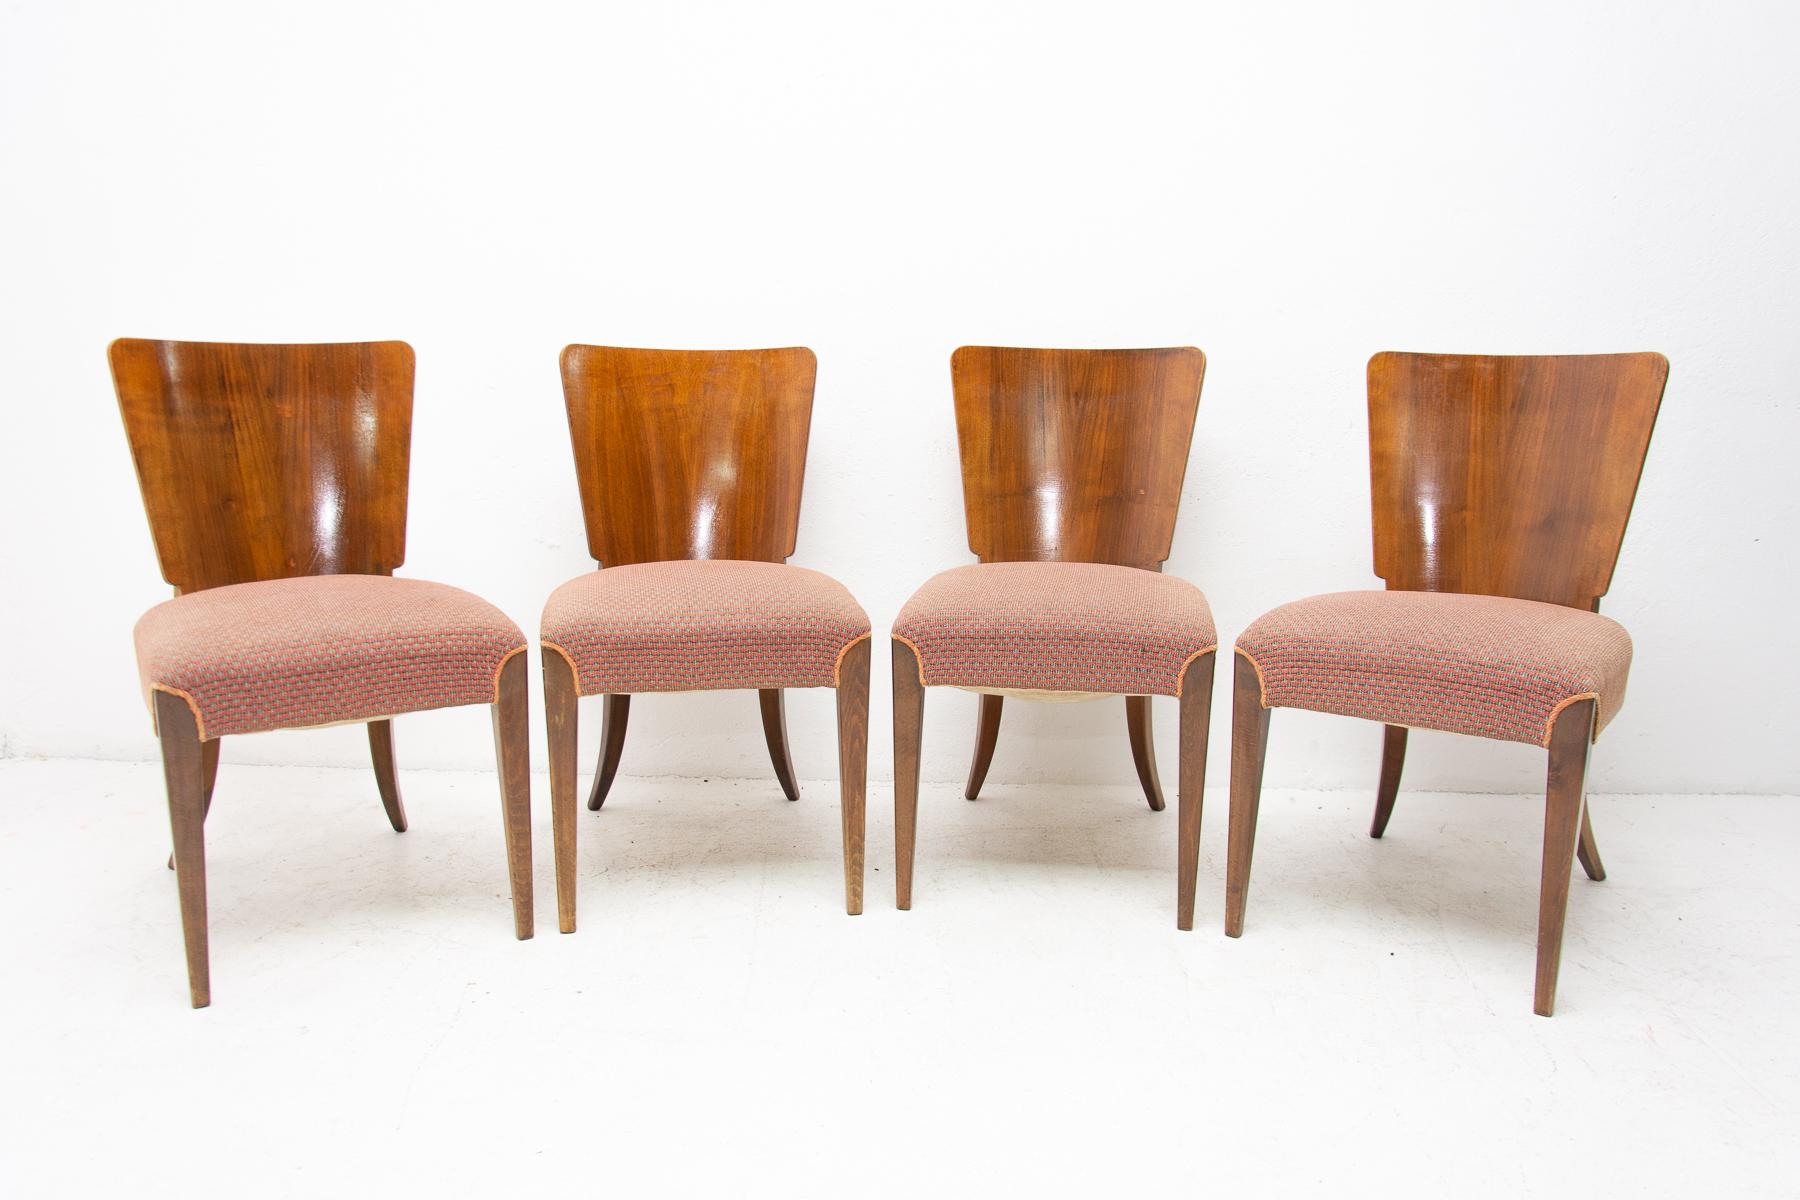 Set of four dining chairs, catalog number H-214, designed by Jindrich Halabala in the 1930s, manufactured in ÚP Závody in the 1950s. It features walnut veneer and original upholstery. The chairs are in its good original condition. Have a beautiful